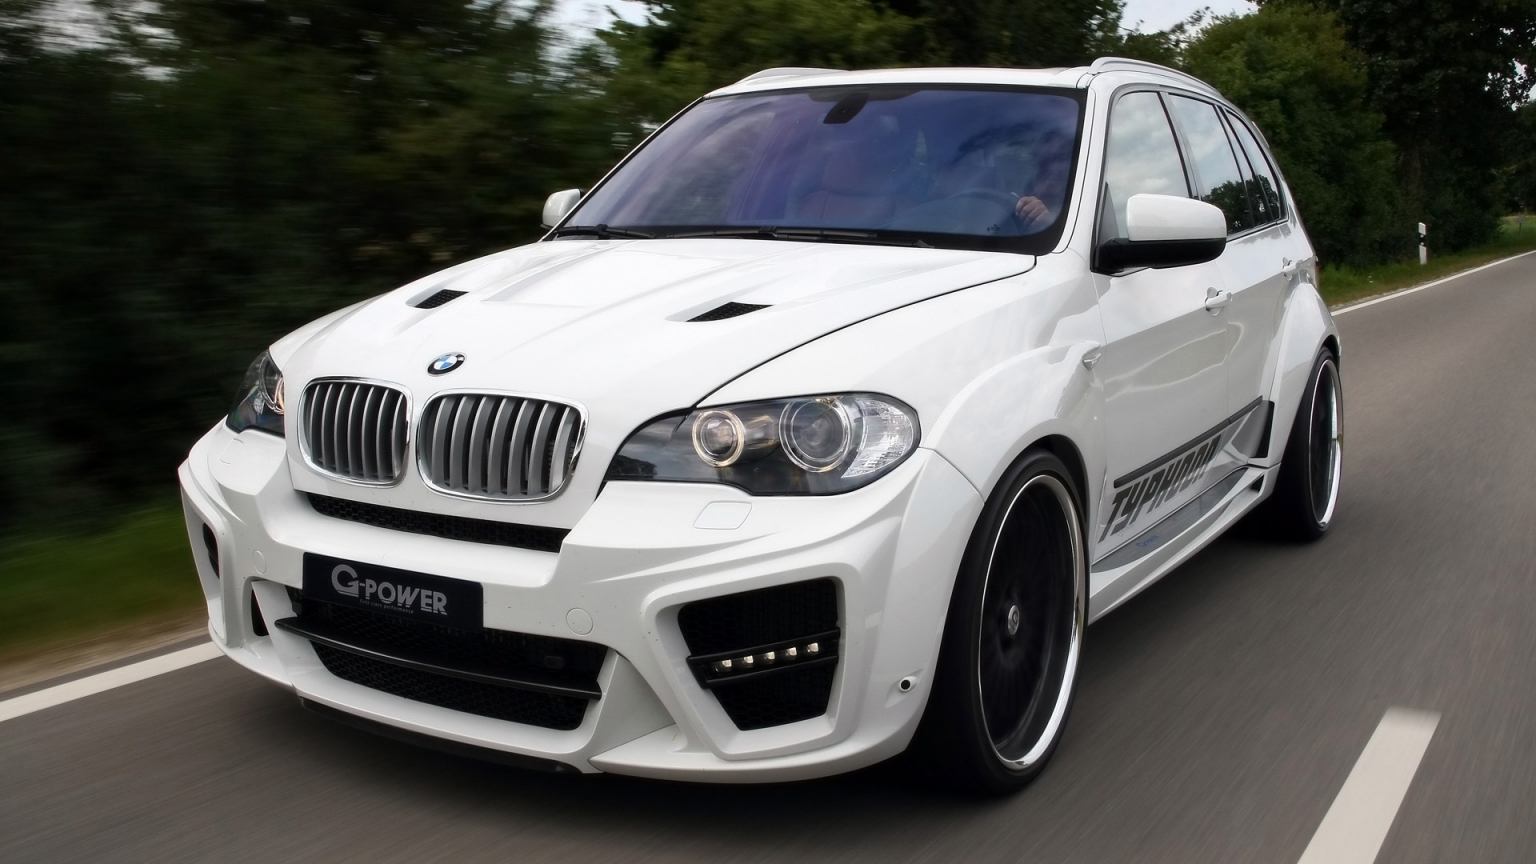 BMW X5 Typhoon RS 2010 G Power for 1536 x 864 HDTV resolution